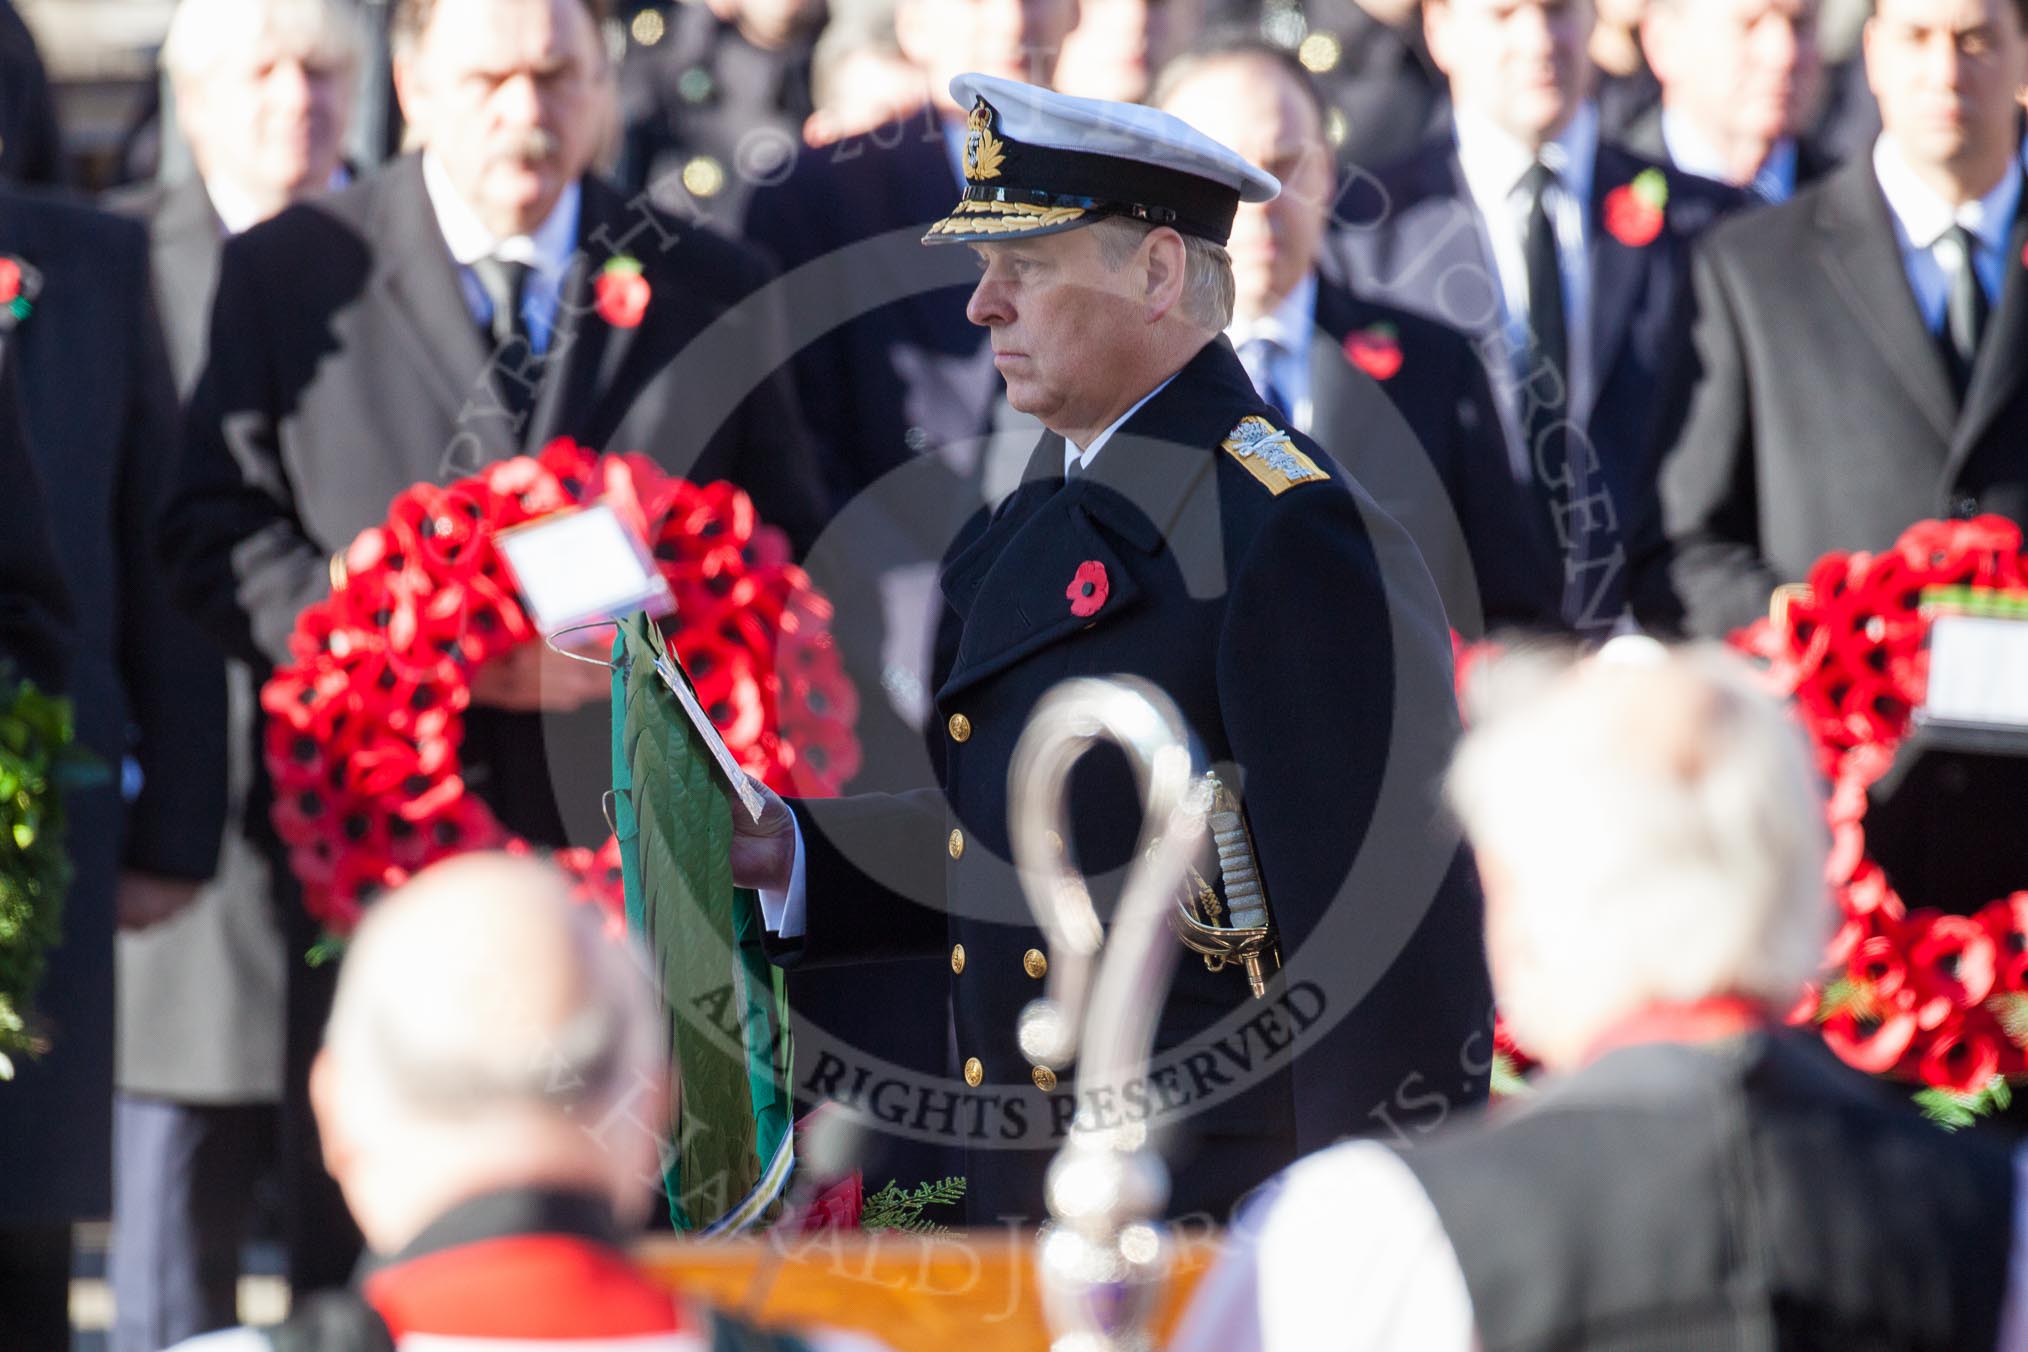 HRH The Duke of York, about to lay his wreath at the Cenotaph. In the foreground, and out of focus, the Bishop of London.